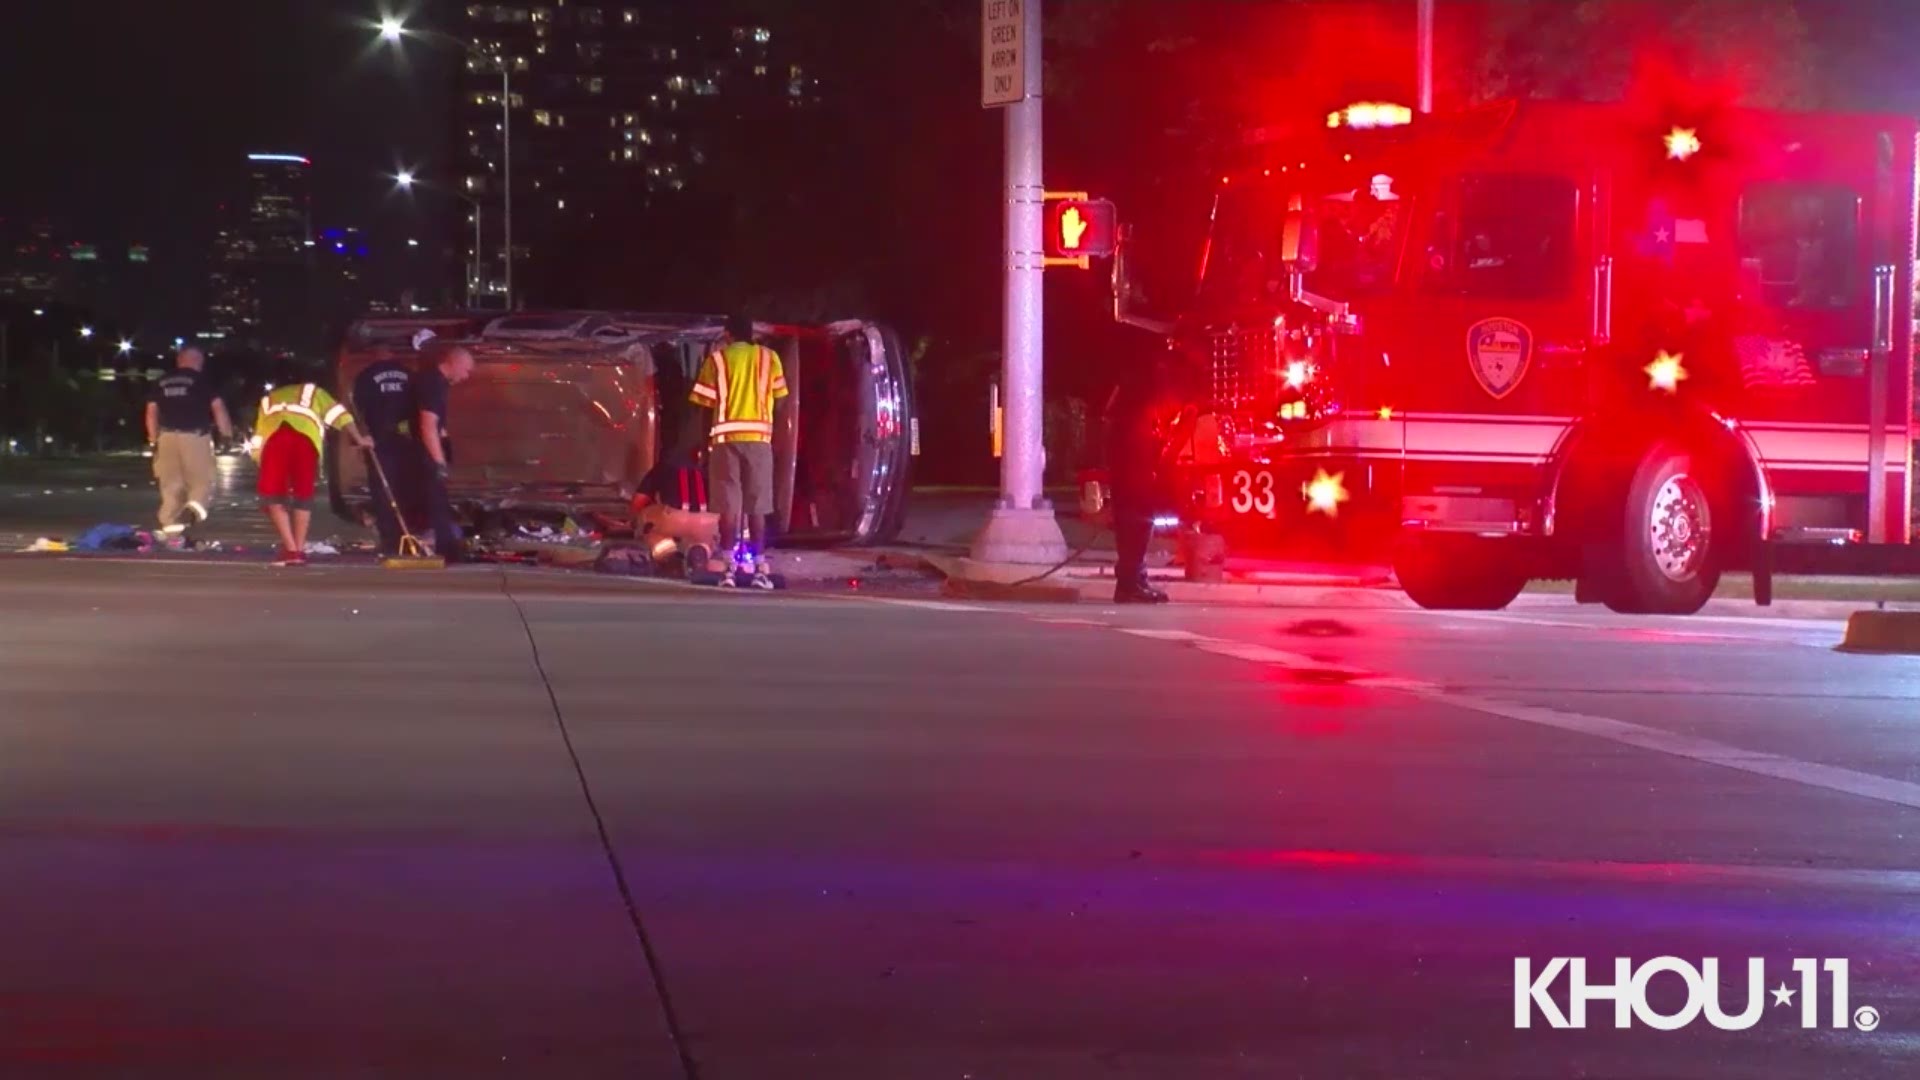 Firefighters rescued a woman who was pinned inside an SUV during a rollover crash in the Texas Medical Center Monday night.